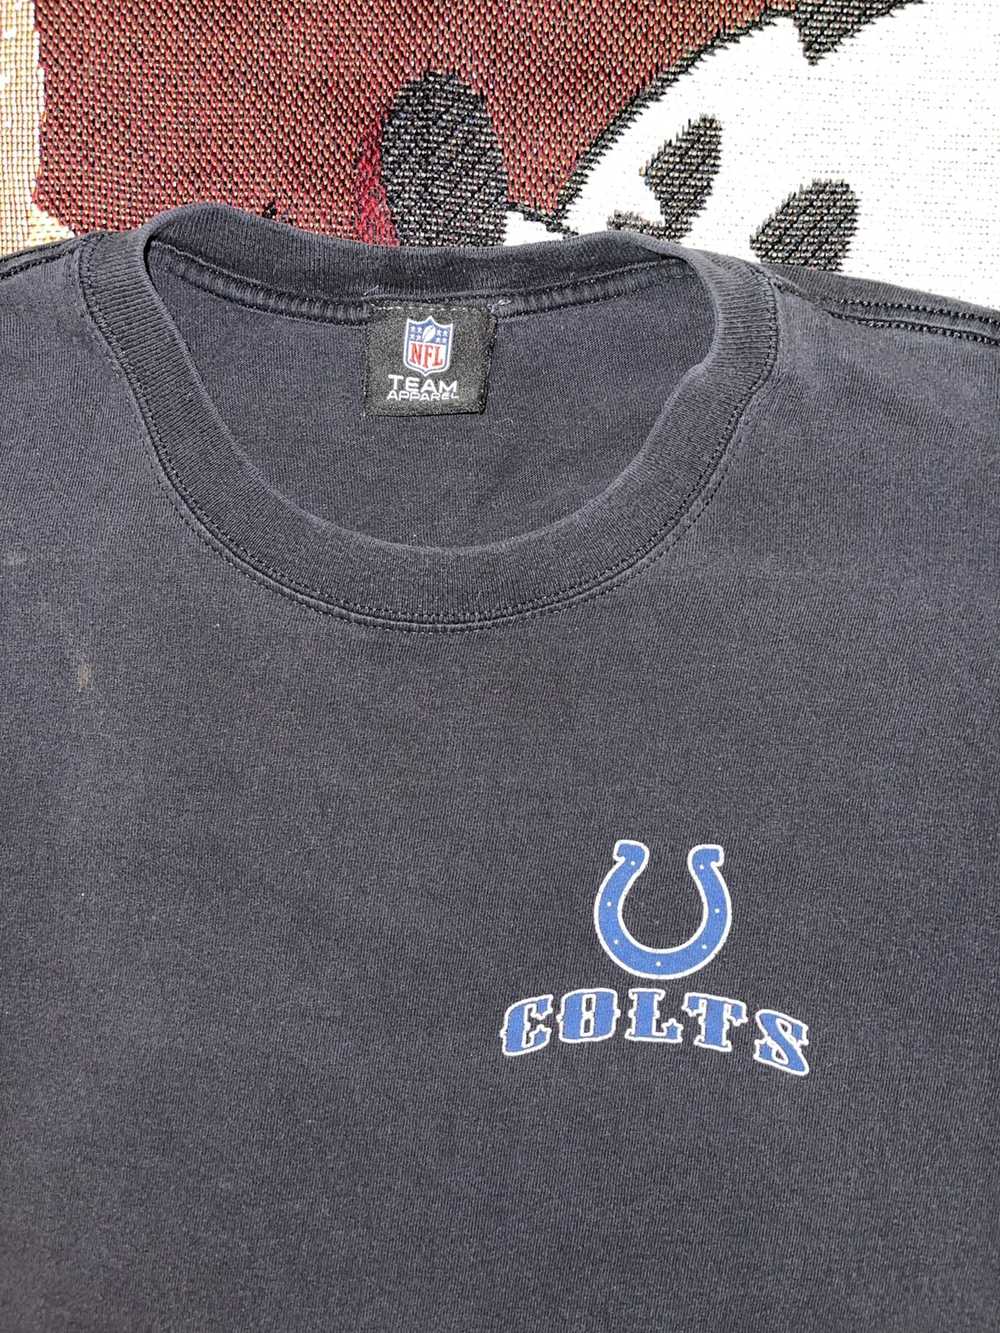 NFL NFL Indianapolis Colts Graphic Tshirt - image 3